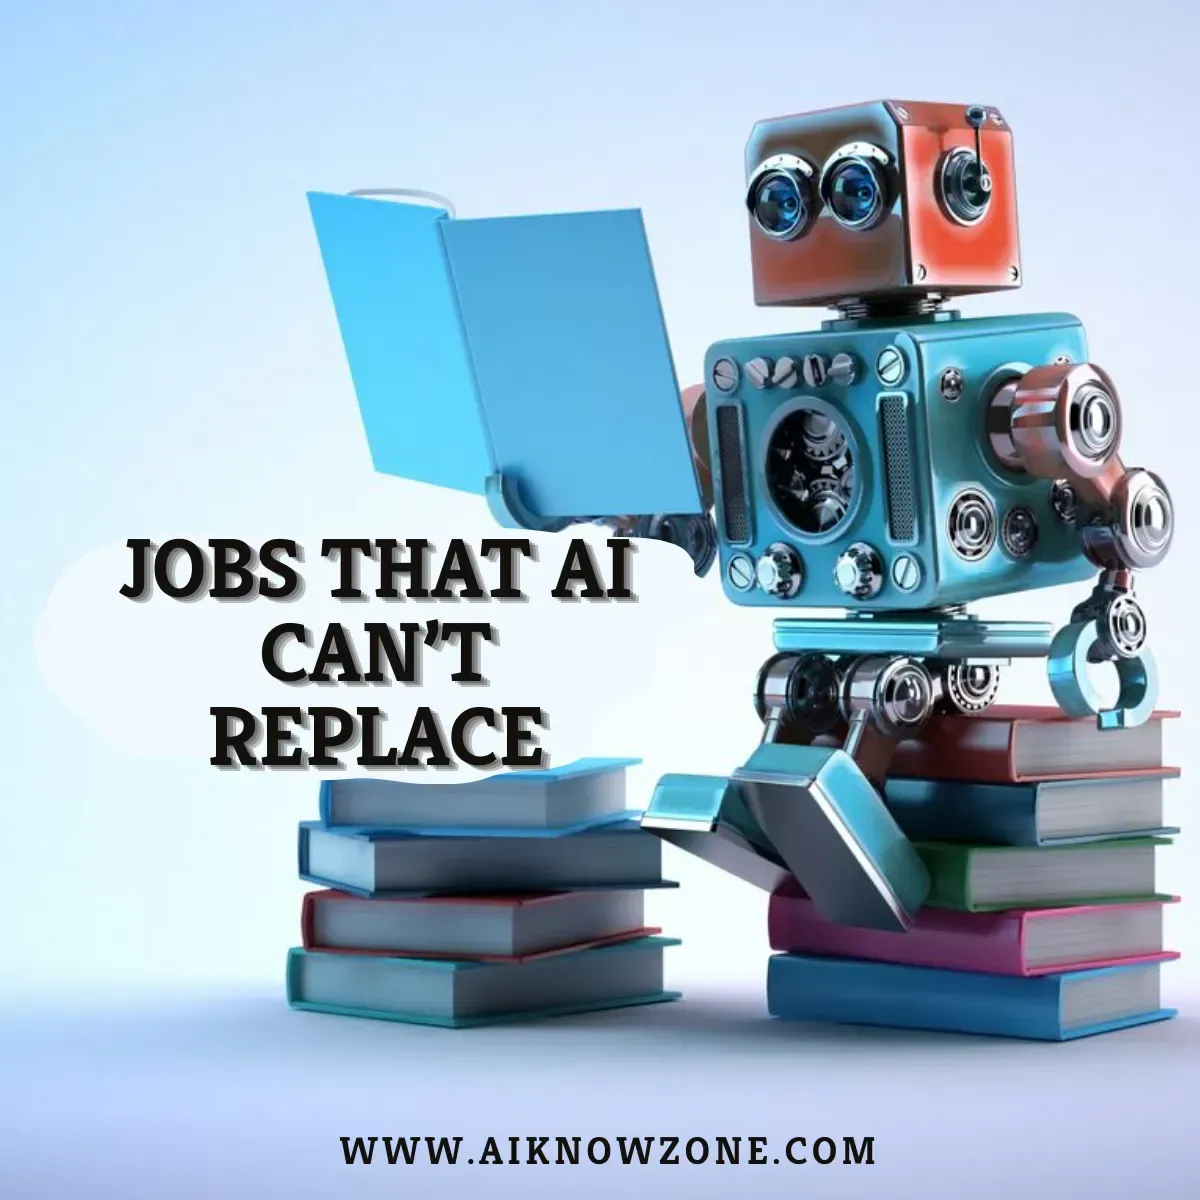 Jobs that AI Can’t Replace